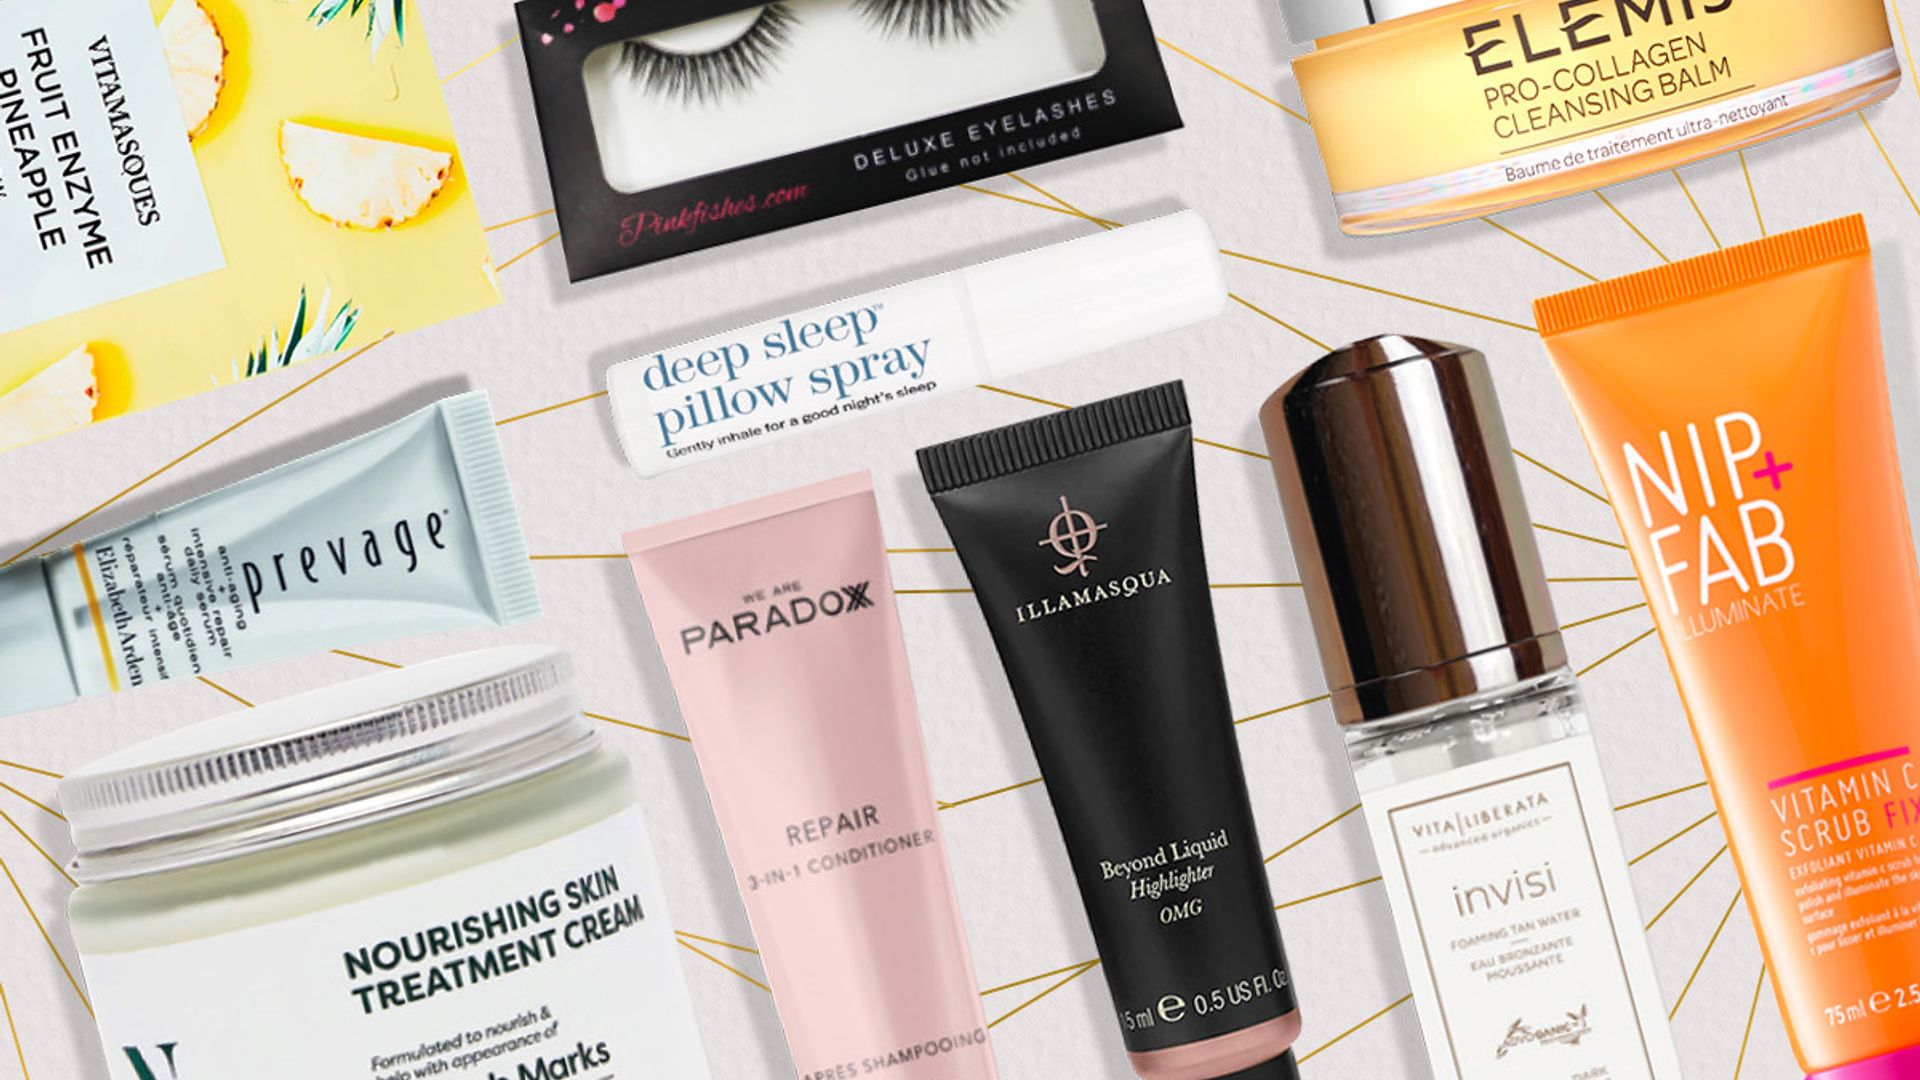 How to get a box of Elemis, Illamasqua, Elizabeth Arden and more beauty products for £35